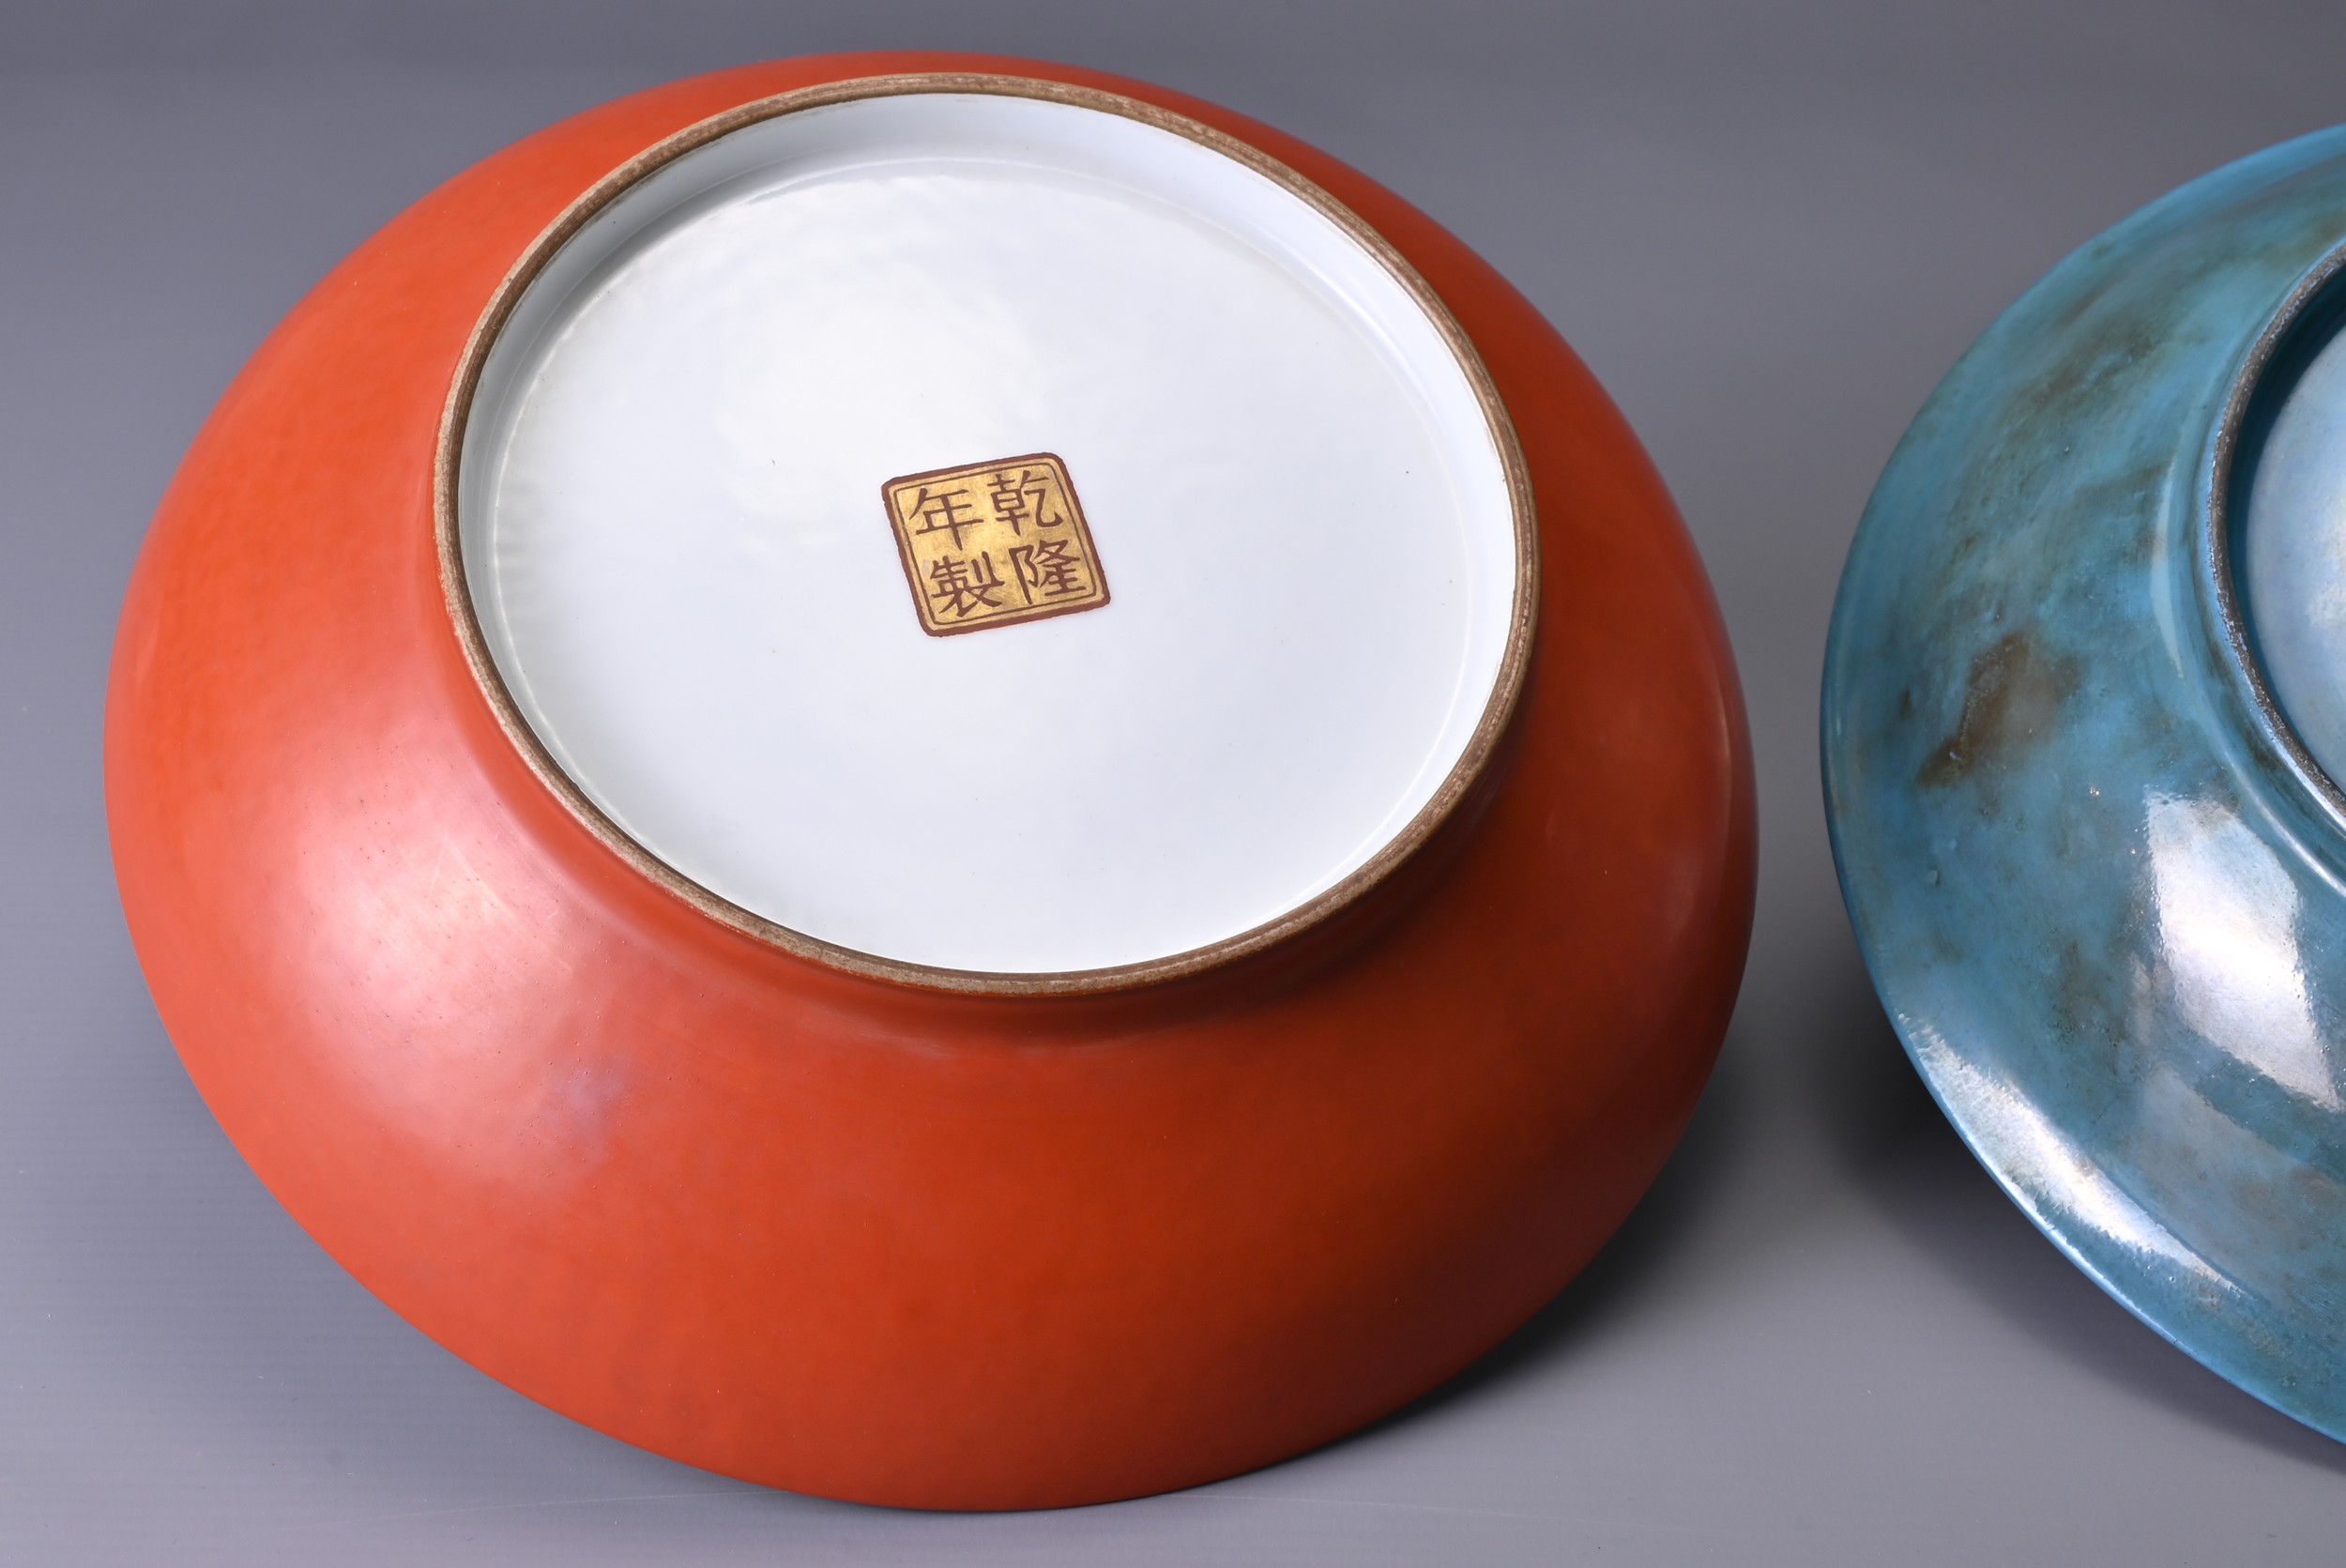 TWO CHINESE PORCELAIN FAMILLE ROSE CIRCULAR DISHES, 20TH CENTURY. Each with iron-red enamel and gilt - Image 5 of 7